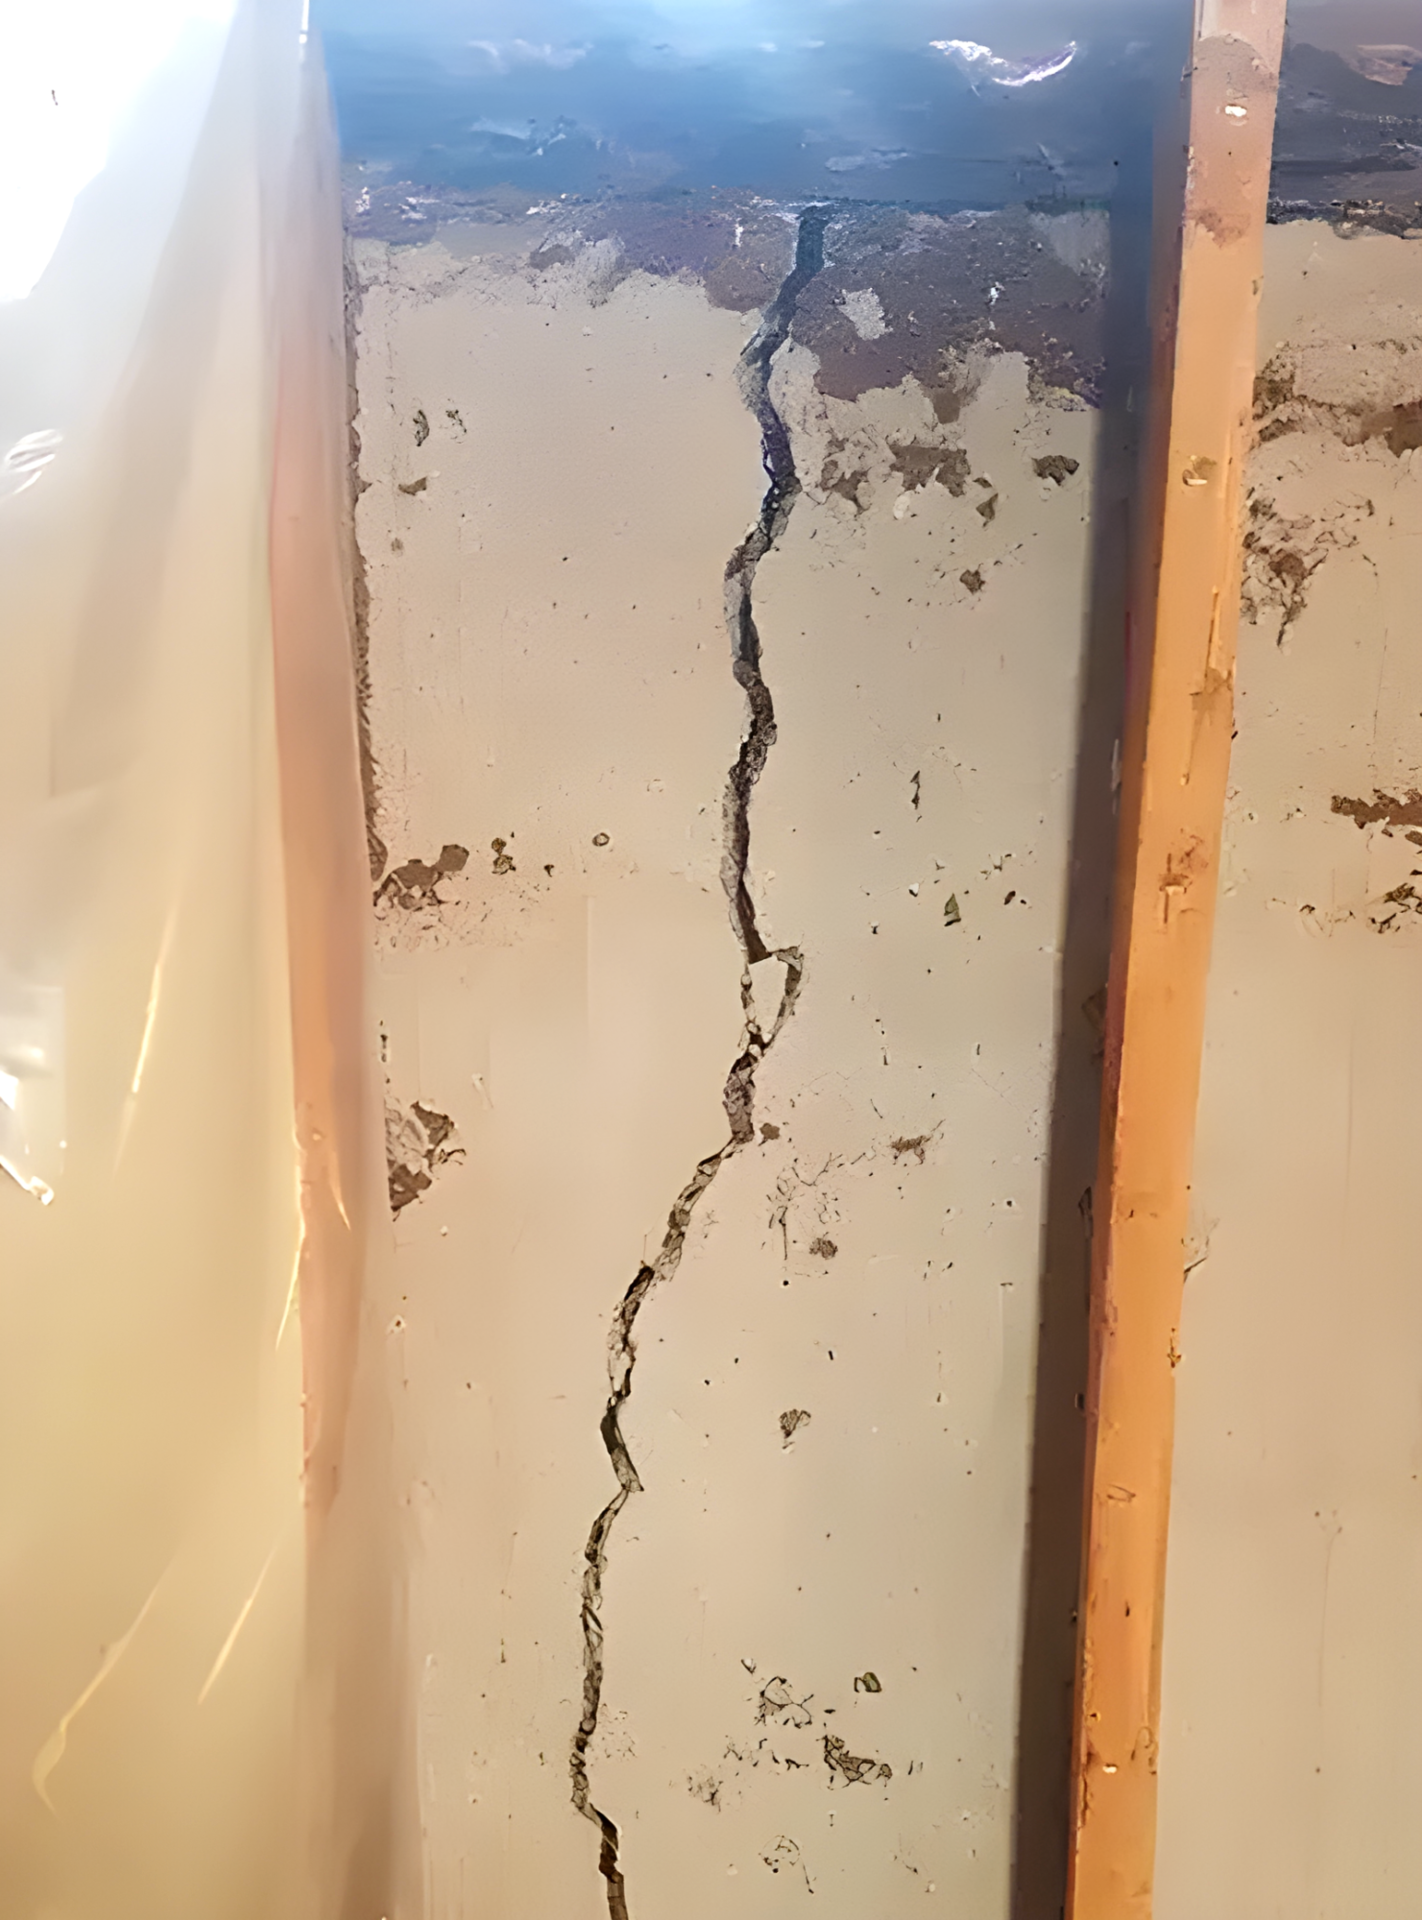 Foundation crack repair company with guaranteed results h&n basement worx